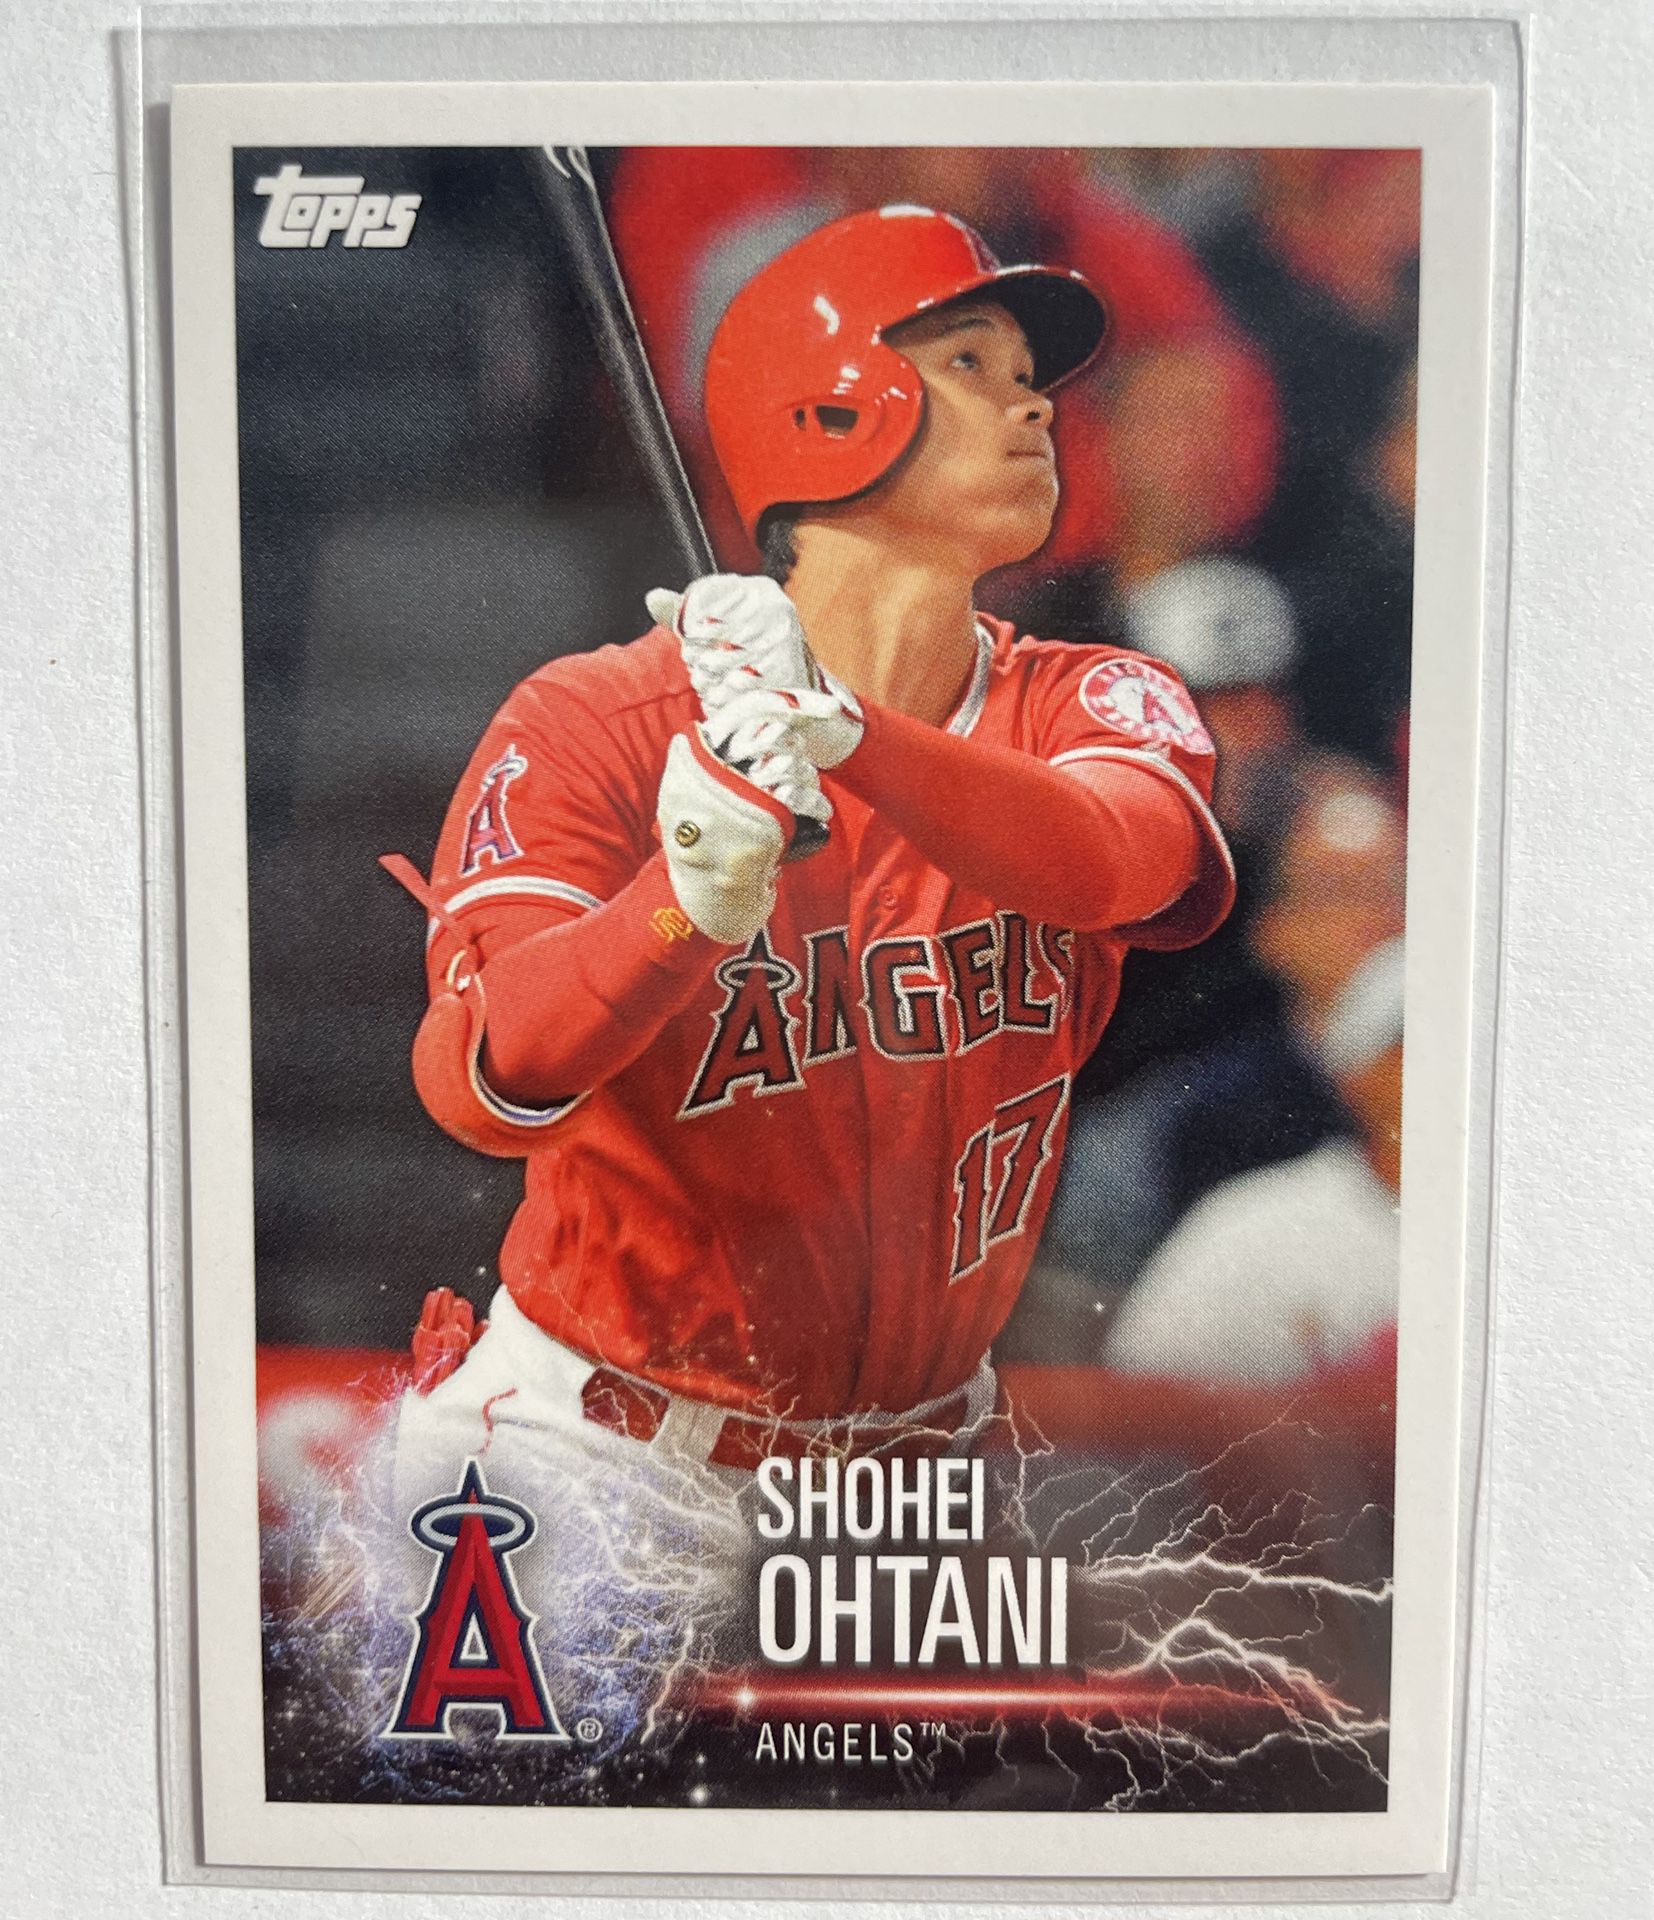 Rare Mint 2019 Topps MLB Baseball Sticker Card Collection Shohei Ohtani Rookies and Rising Stars Los Angelas Angels and Khris Davis #63 